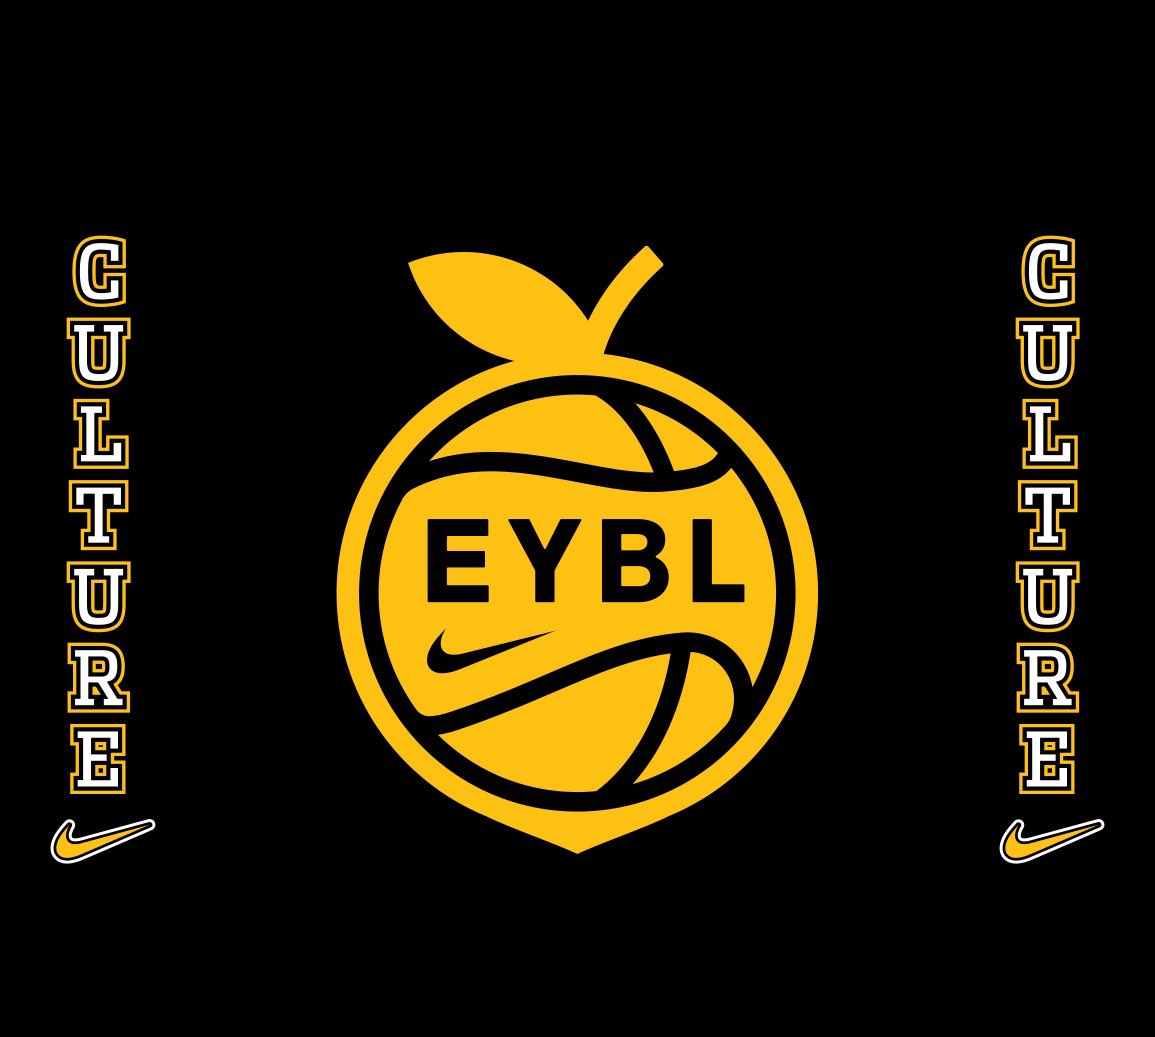 Brad Beal Elite found a way to get the W, 66-61 over Scholars behind a balanced scoring attack. Layden Blocker 15p, Desmond White 13p, Ketraleus Aldridge 13p & Scotty Middleton 10p <- TOUGH mid-post work. Brad Beal Elite are clicking at the right time of the year!